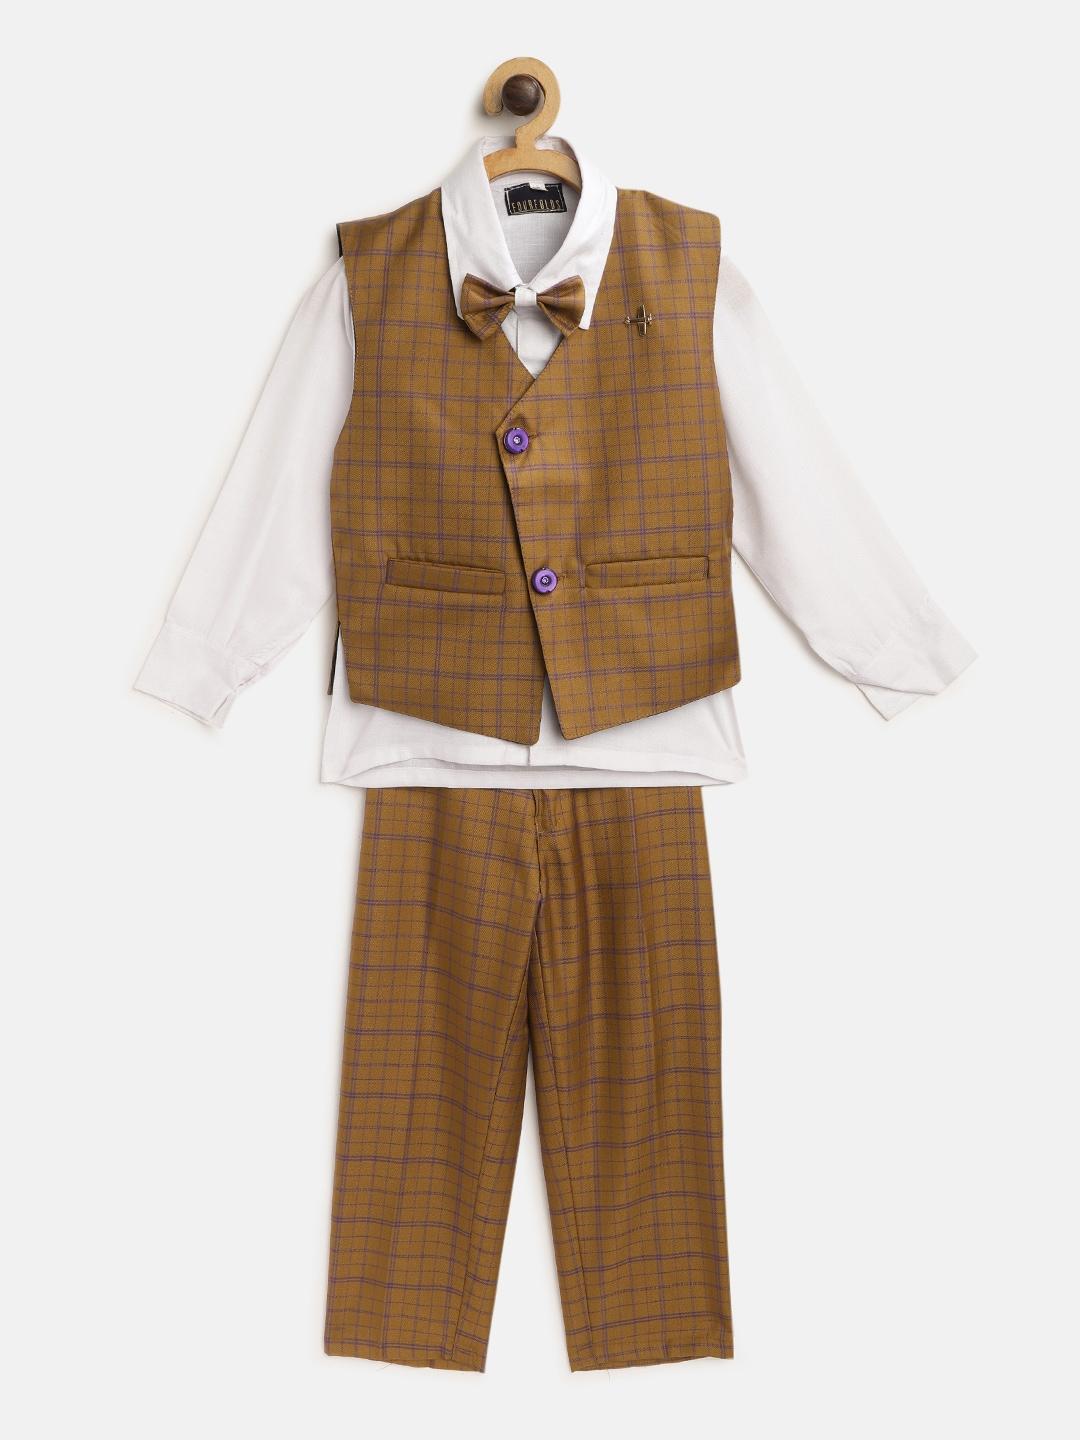 FOURFOLDS Boys White & Mustard Yellow Solid Clothing Set With Waistcoat & Bow